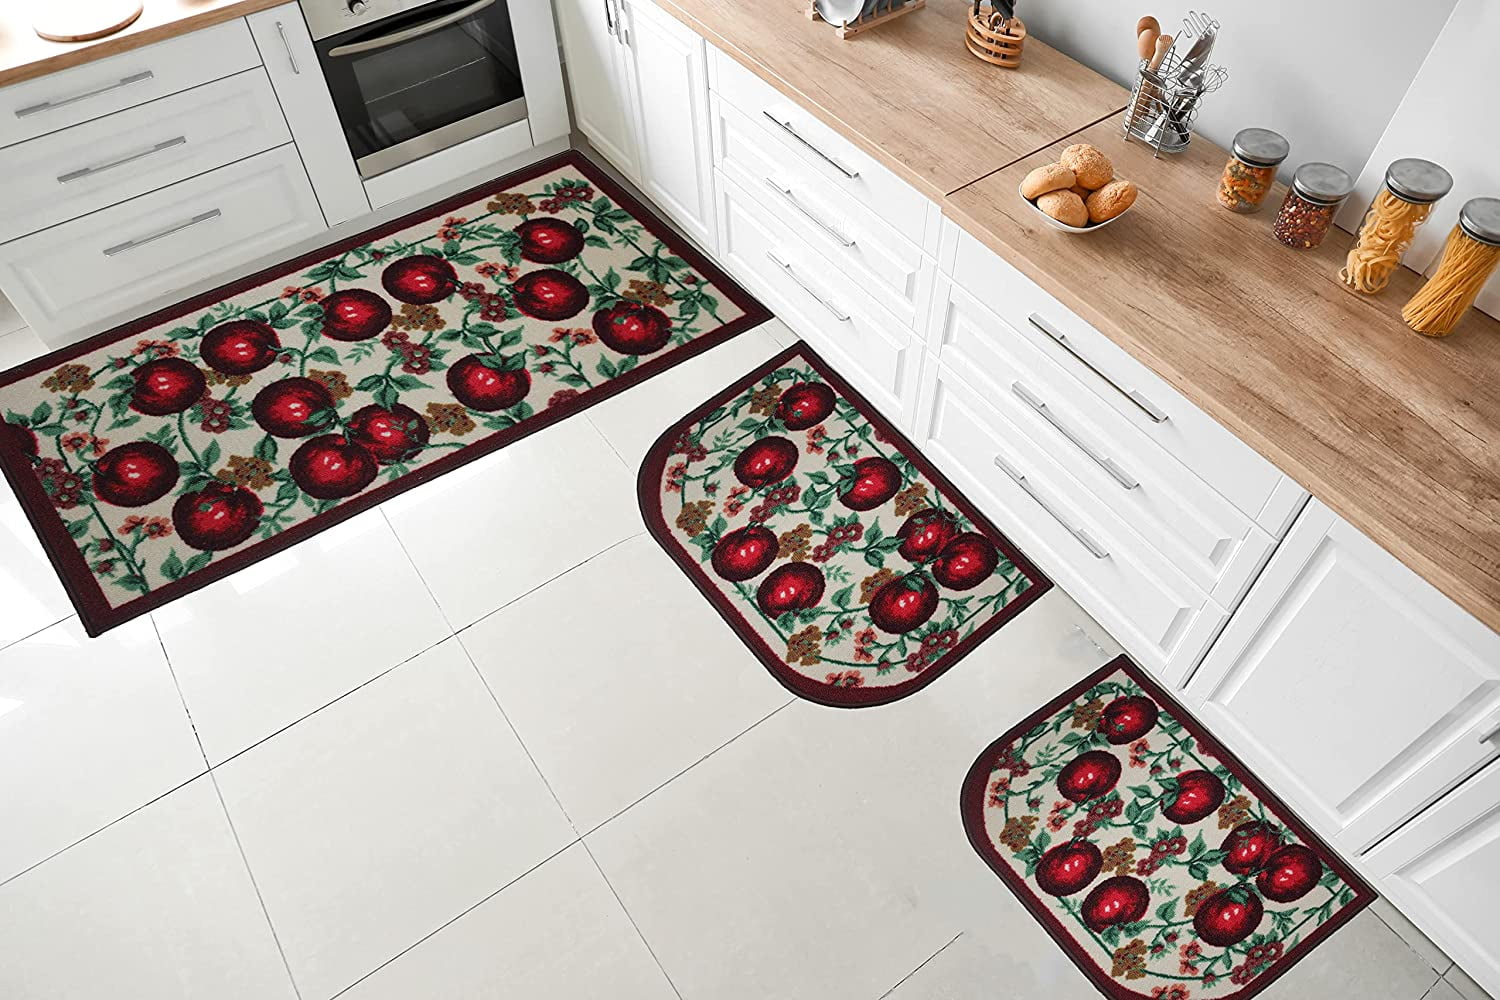 LUFEIJIASHI Small Kitchen Rugs and mats Non Skid Washable Kitchen Runner Rug  Absorbent Farmhouse Style Kitchen Floor mats for in Front of Sink (Light  Coffee, 20…